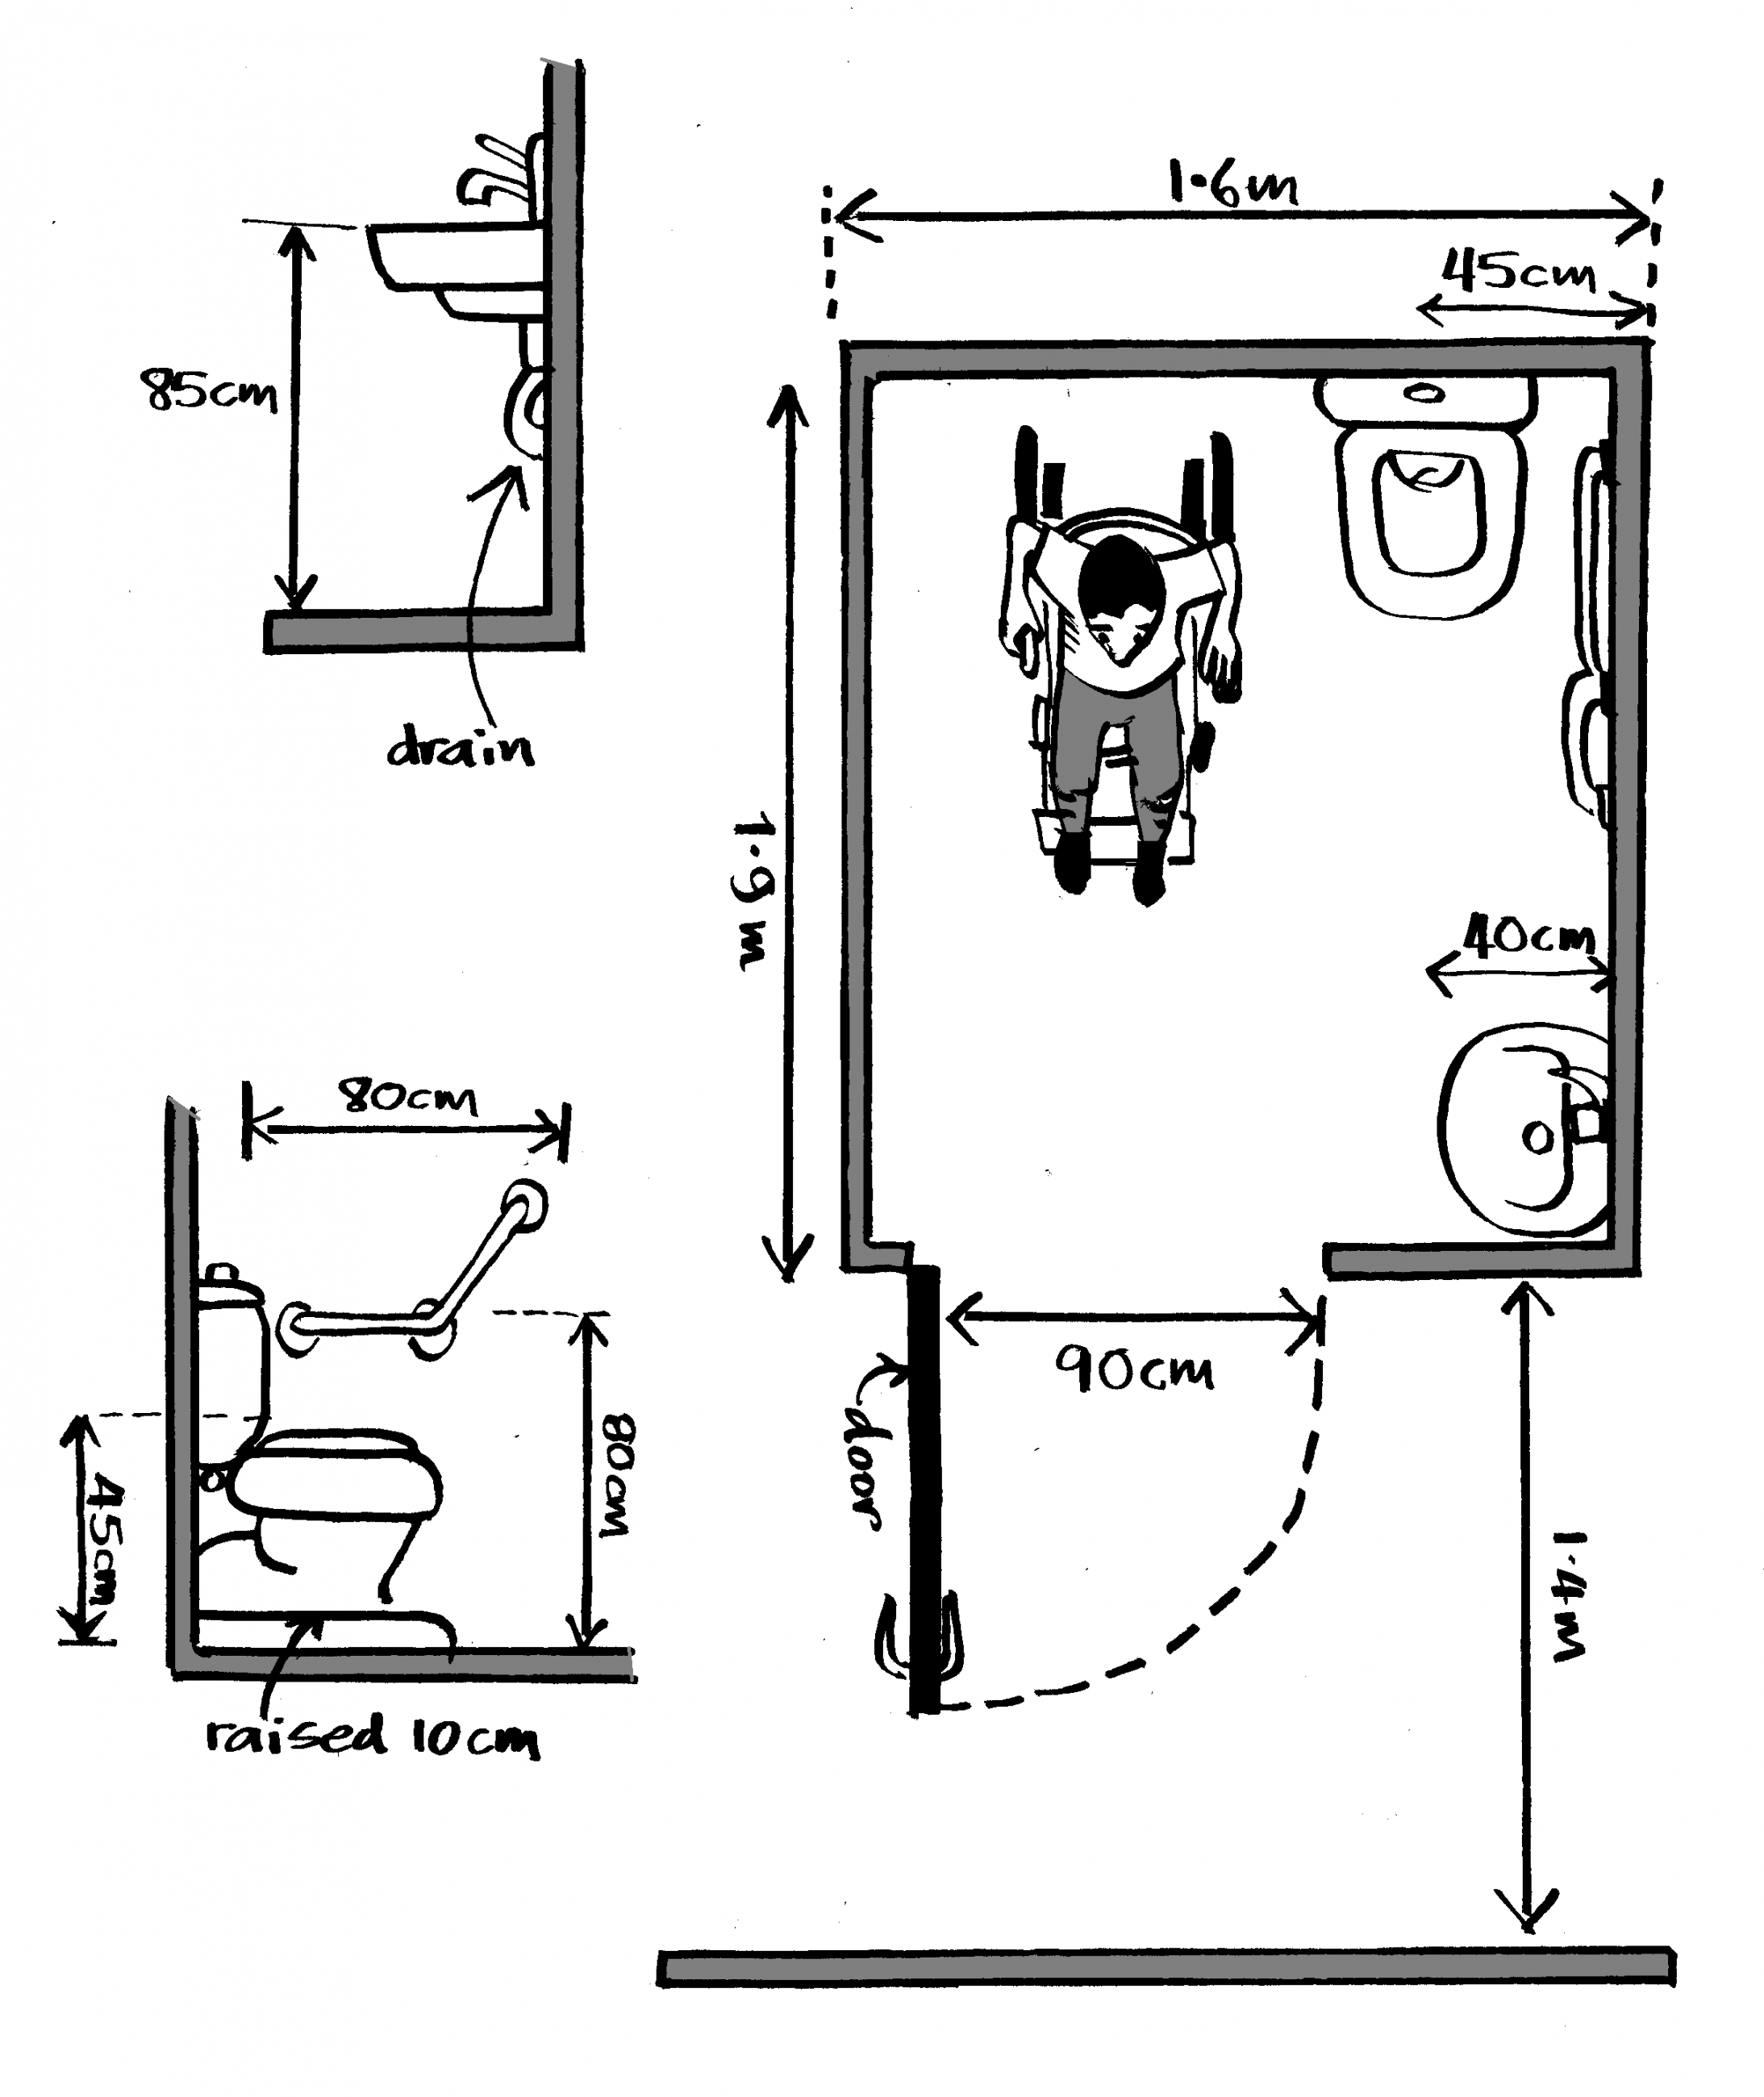 A sketch of the measurements required for an accessible latrine, to enable a wheel chair user to independently use the facility